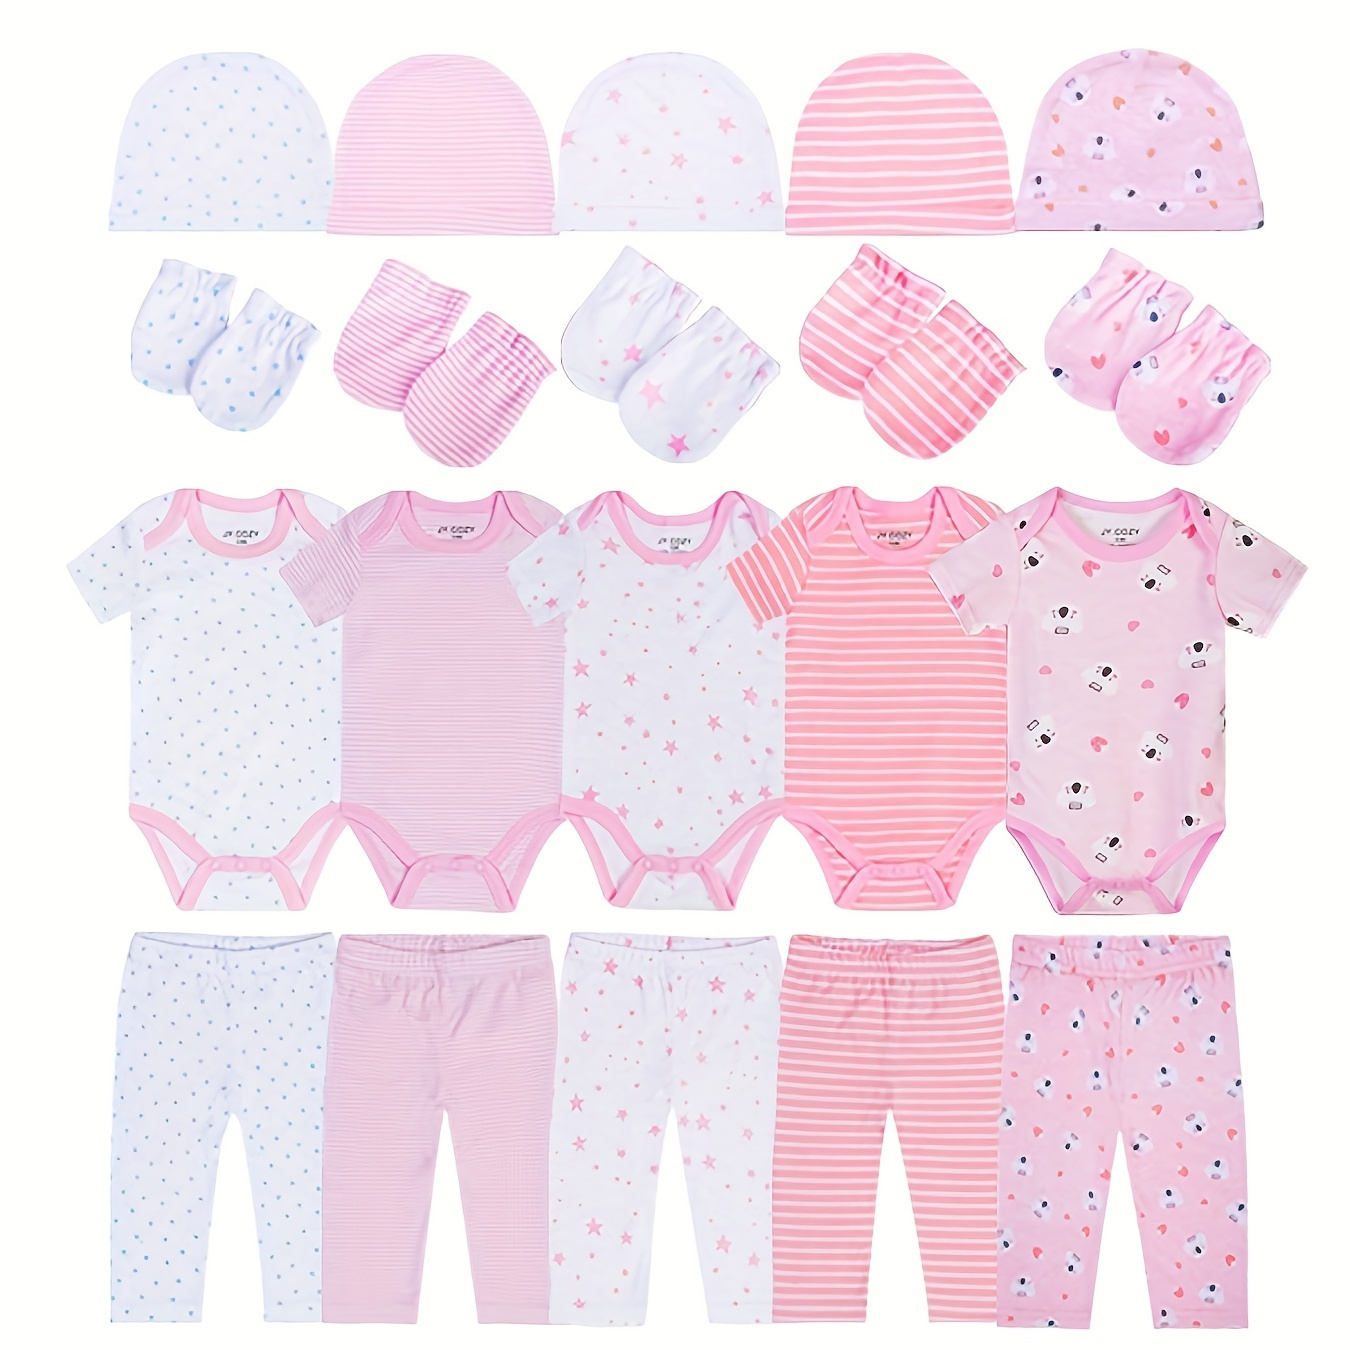 

20-piece Newborn Baby Clothes Set - Perfect For Pregnancy Gifts & Beyond!